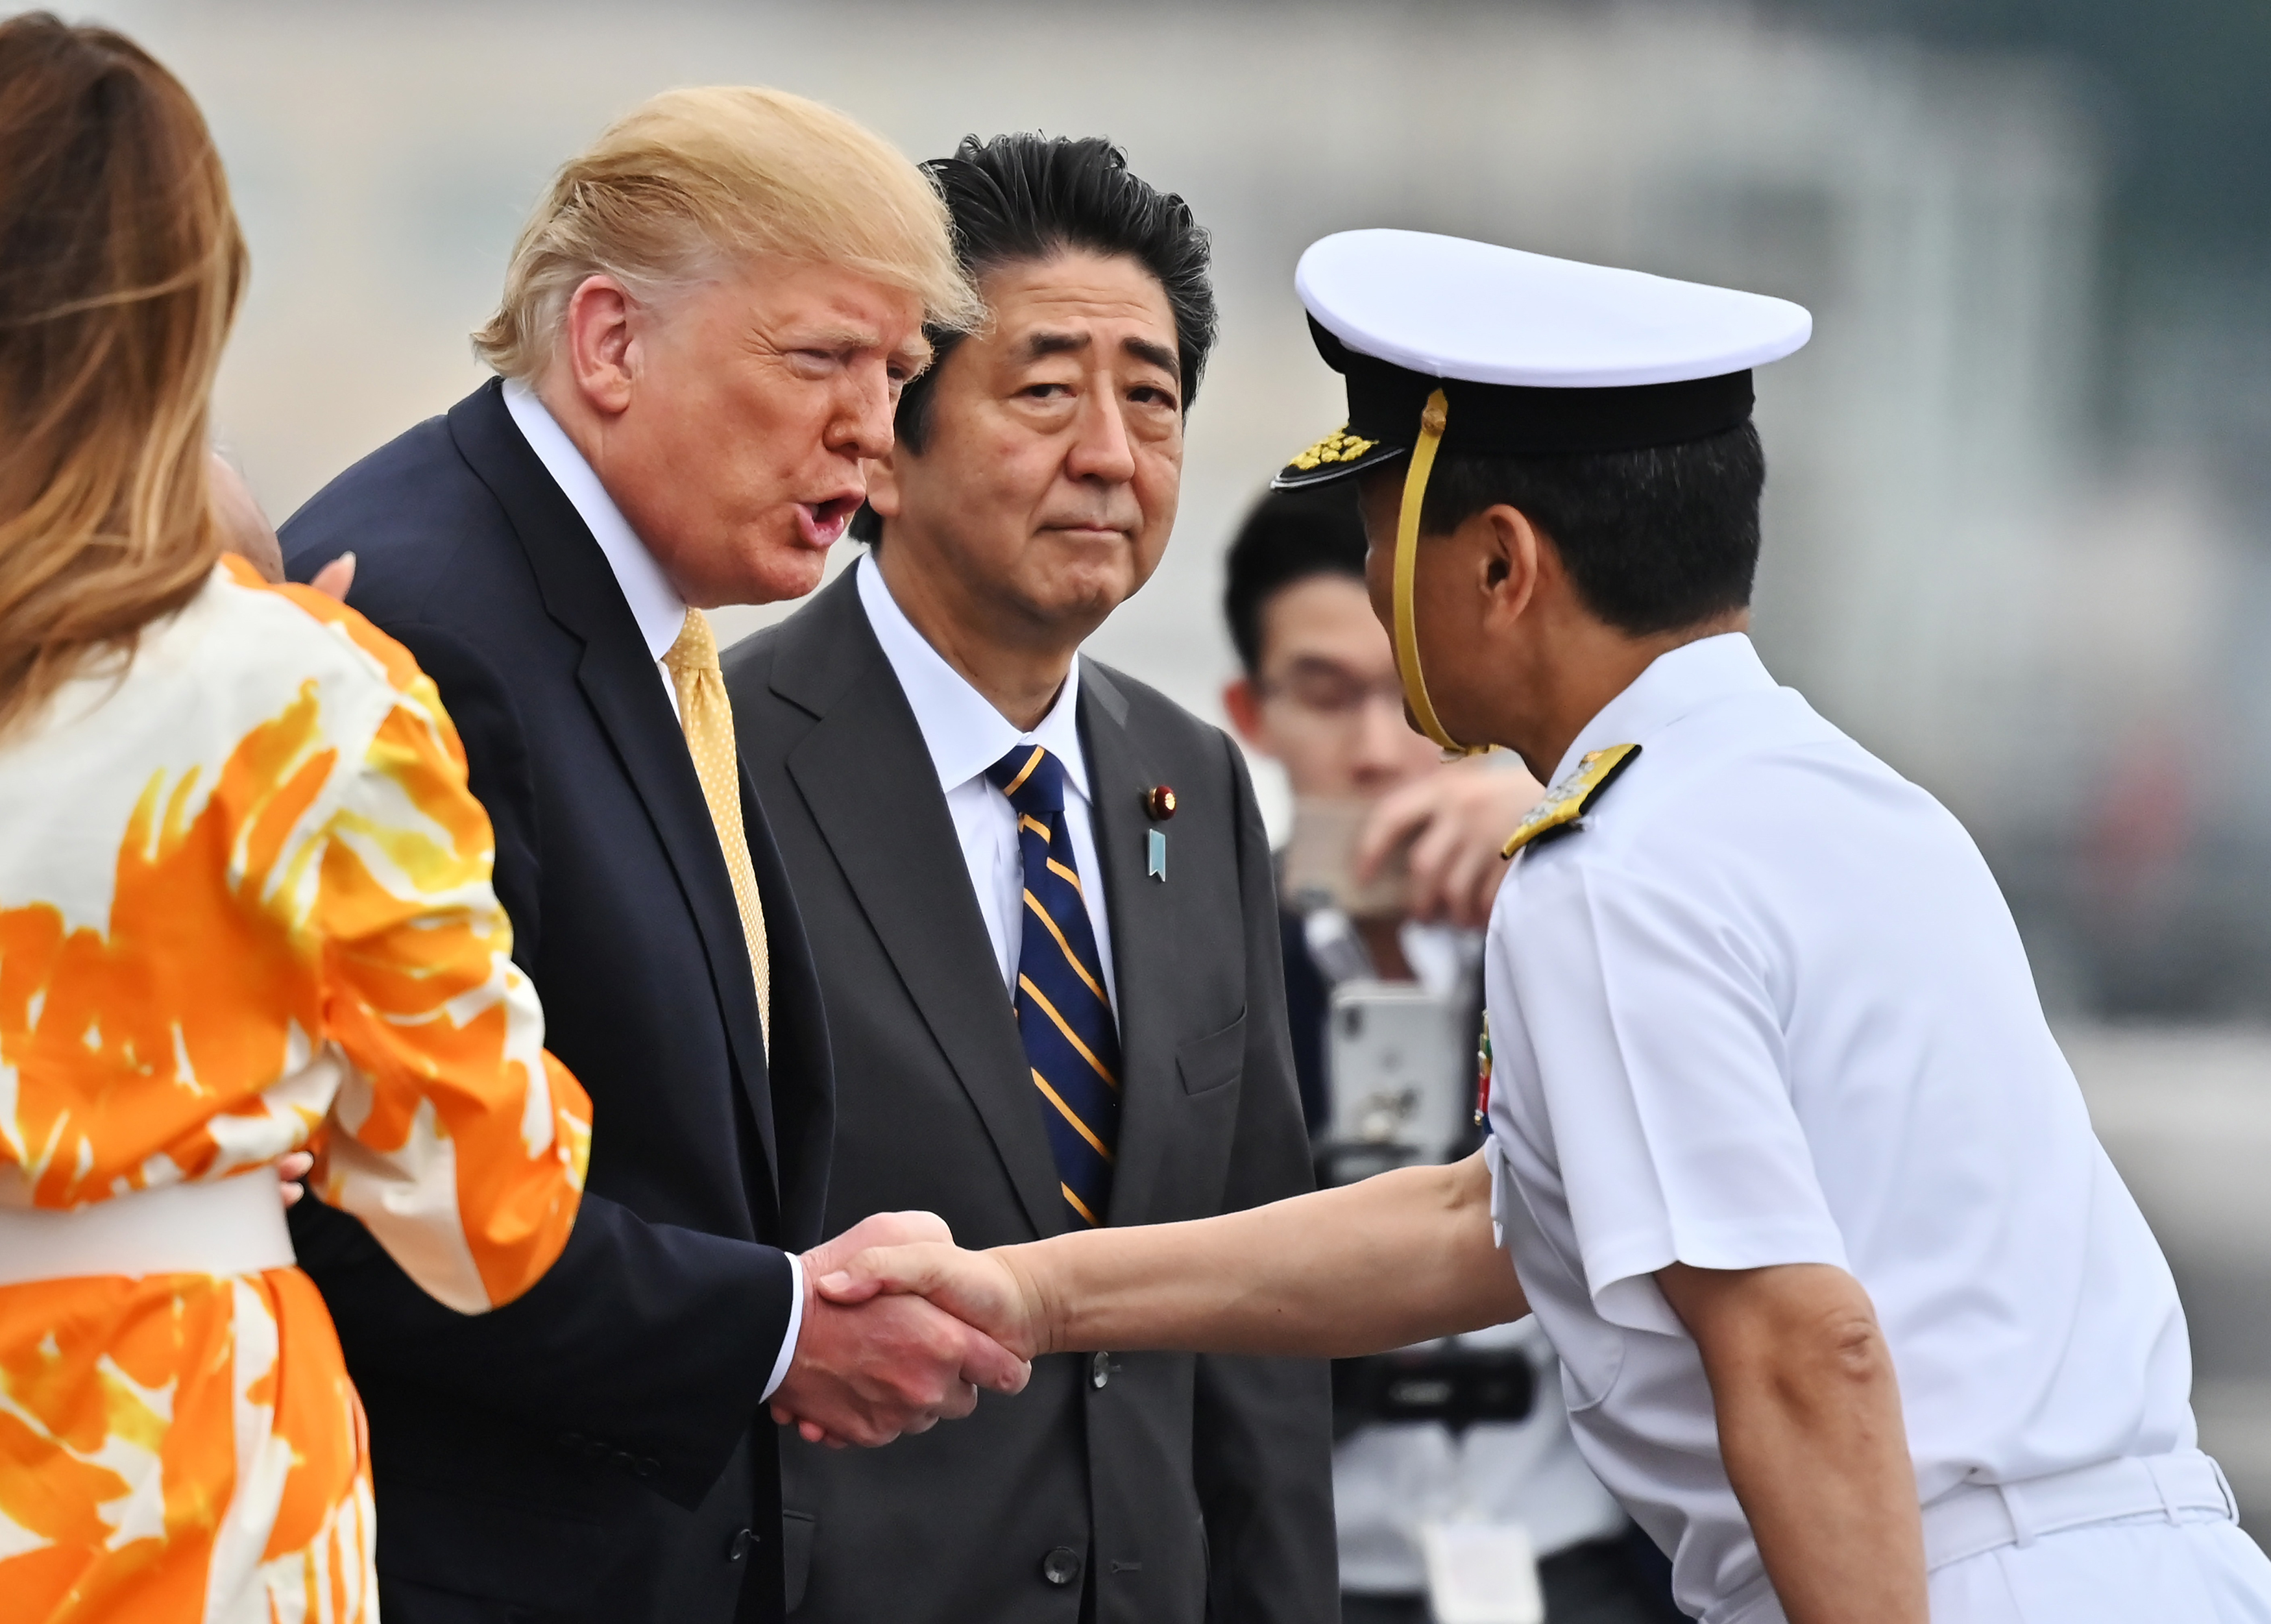 U.S. President Donald Trump, second left, shakes hands with Hideki Mizuta, right, captain of Japanese destroyer, the J.S. Kaga,  as he leaves the navy ship in Yokosuka, south of Tokyo Tuesday, May 28, 2019. (Charly Triballeau/Pool Photo via AP)